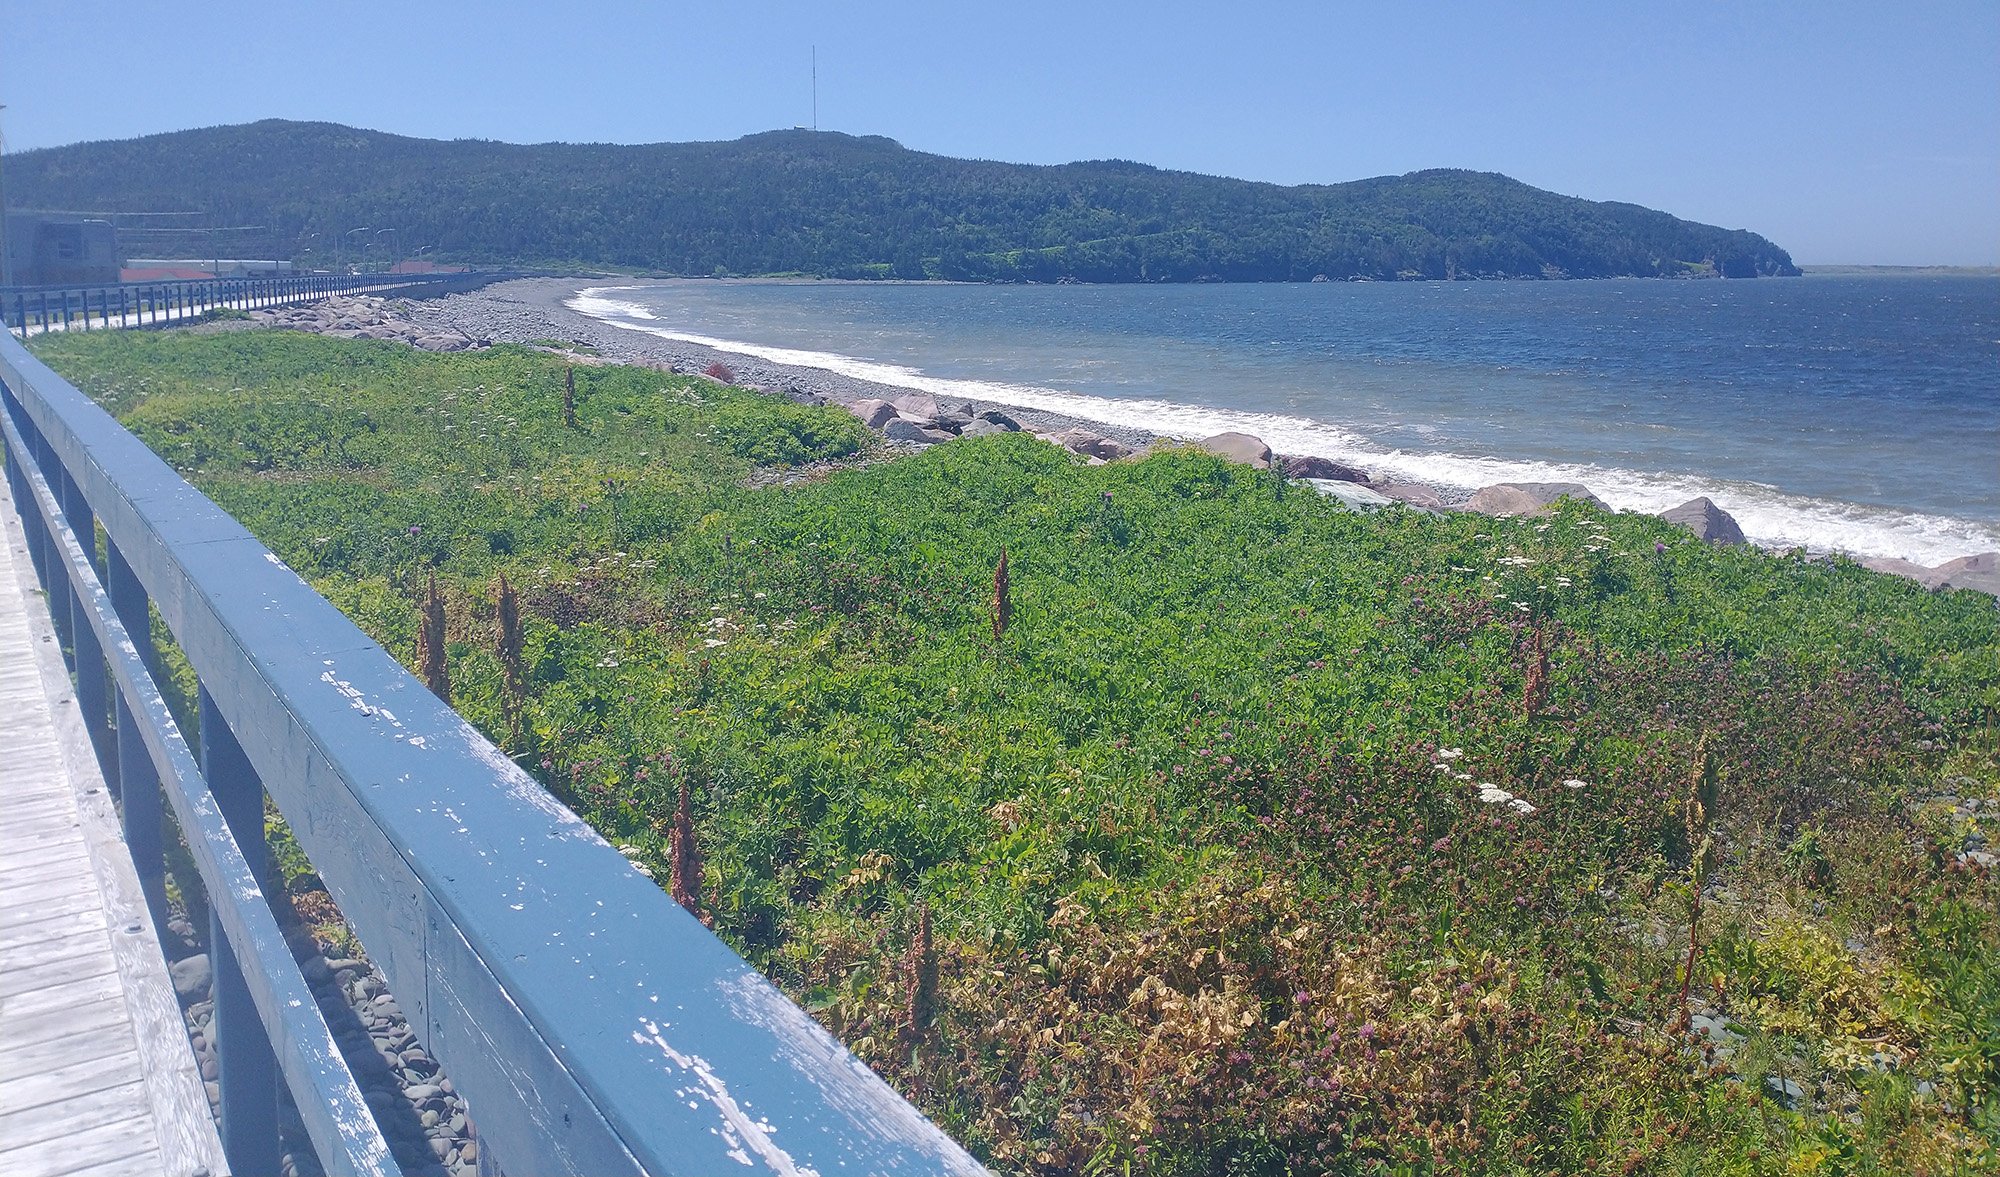 Placentia beach boardwalk. About 1.5km long of this. In all this time I didn't even dip a toe in any beach. Maybe I should do that on the way back...